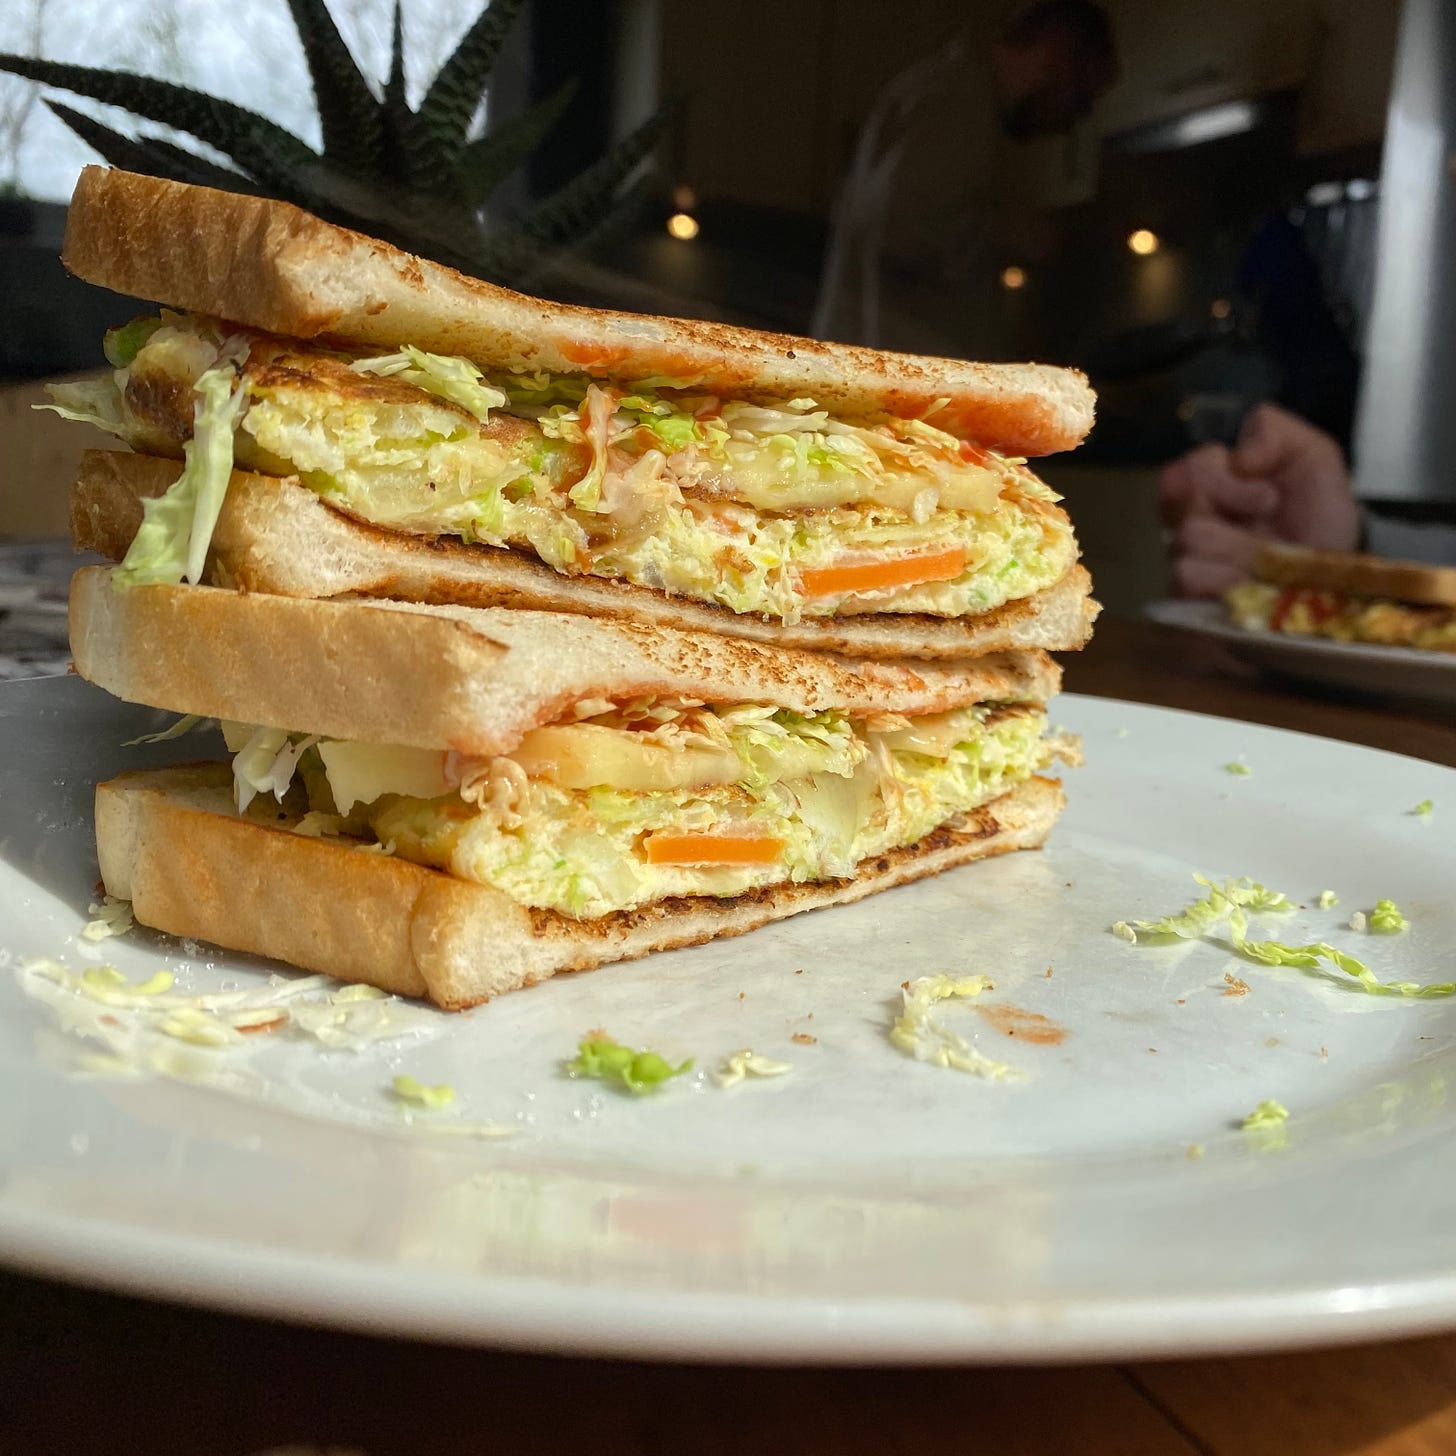 Image shows cut open toasted sandwich filled with shredded vegetable omelette